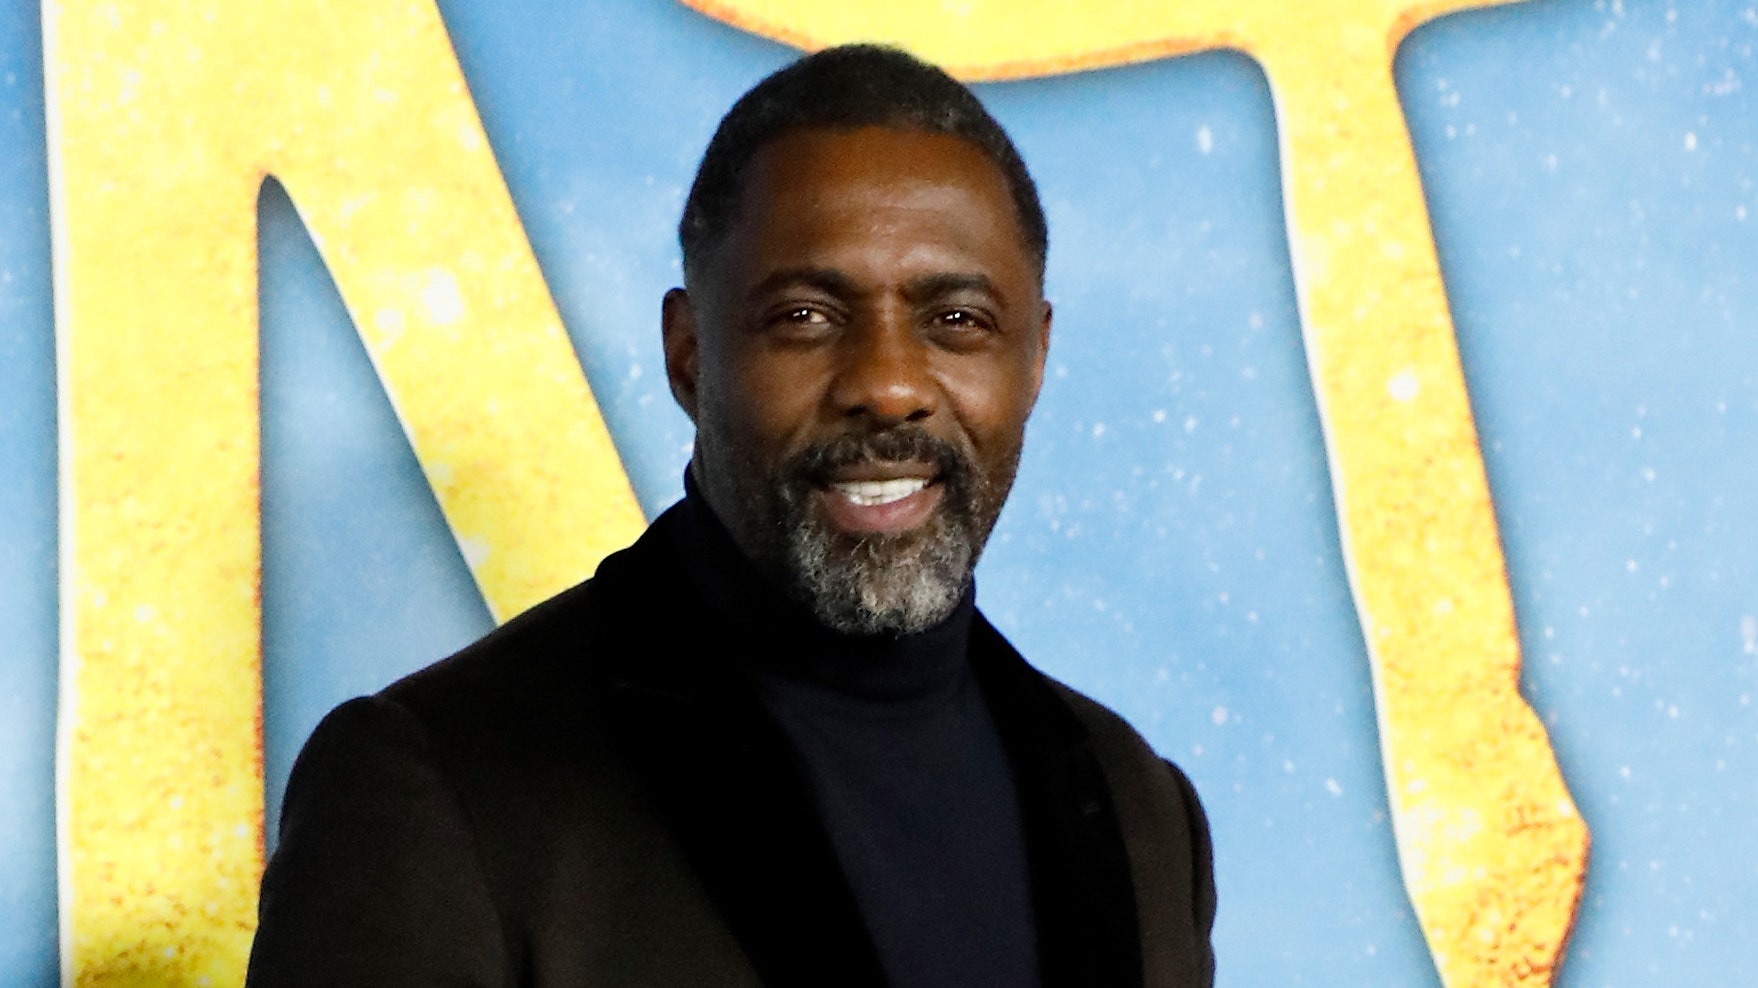 Netflix Inc: Idris Elba tests positive for coronavirus; asks fans to stay  at home and be pragmatic - The Economic Times